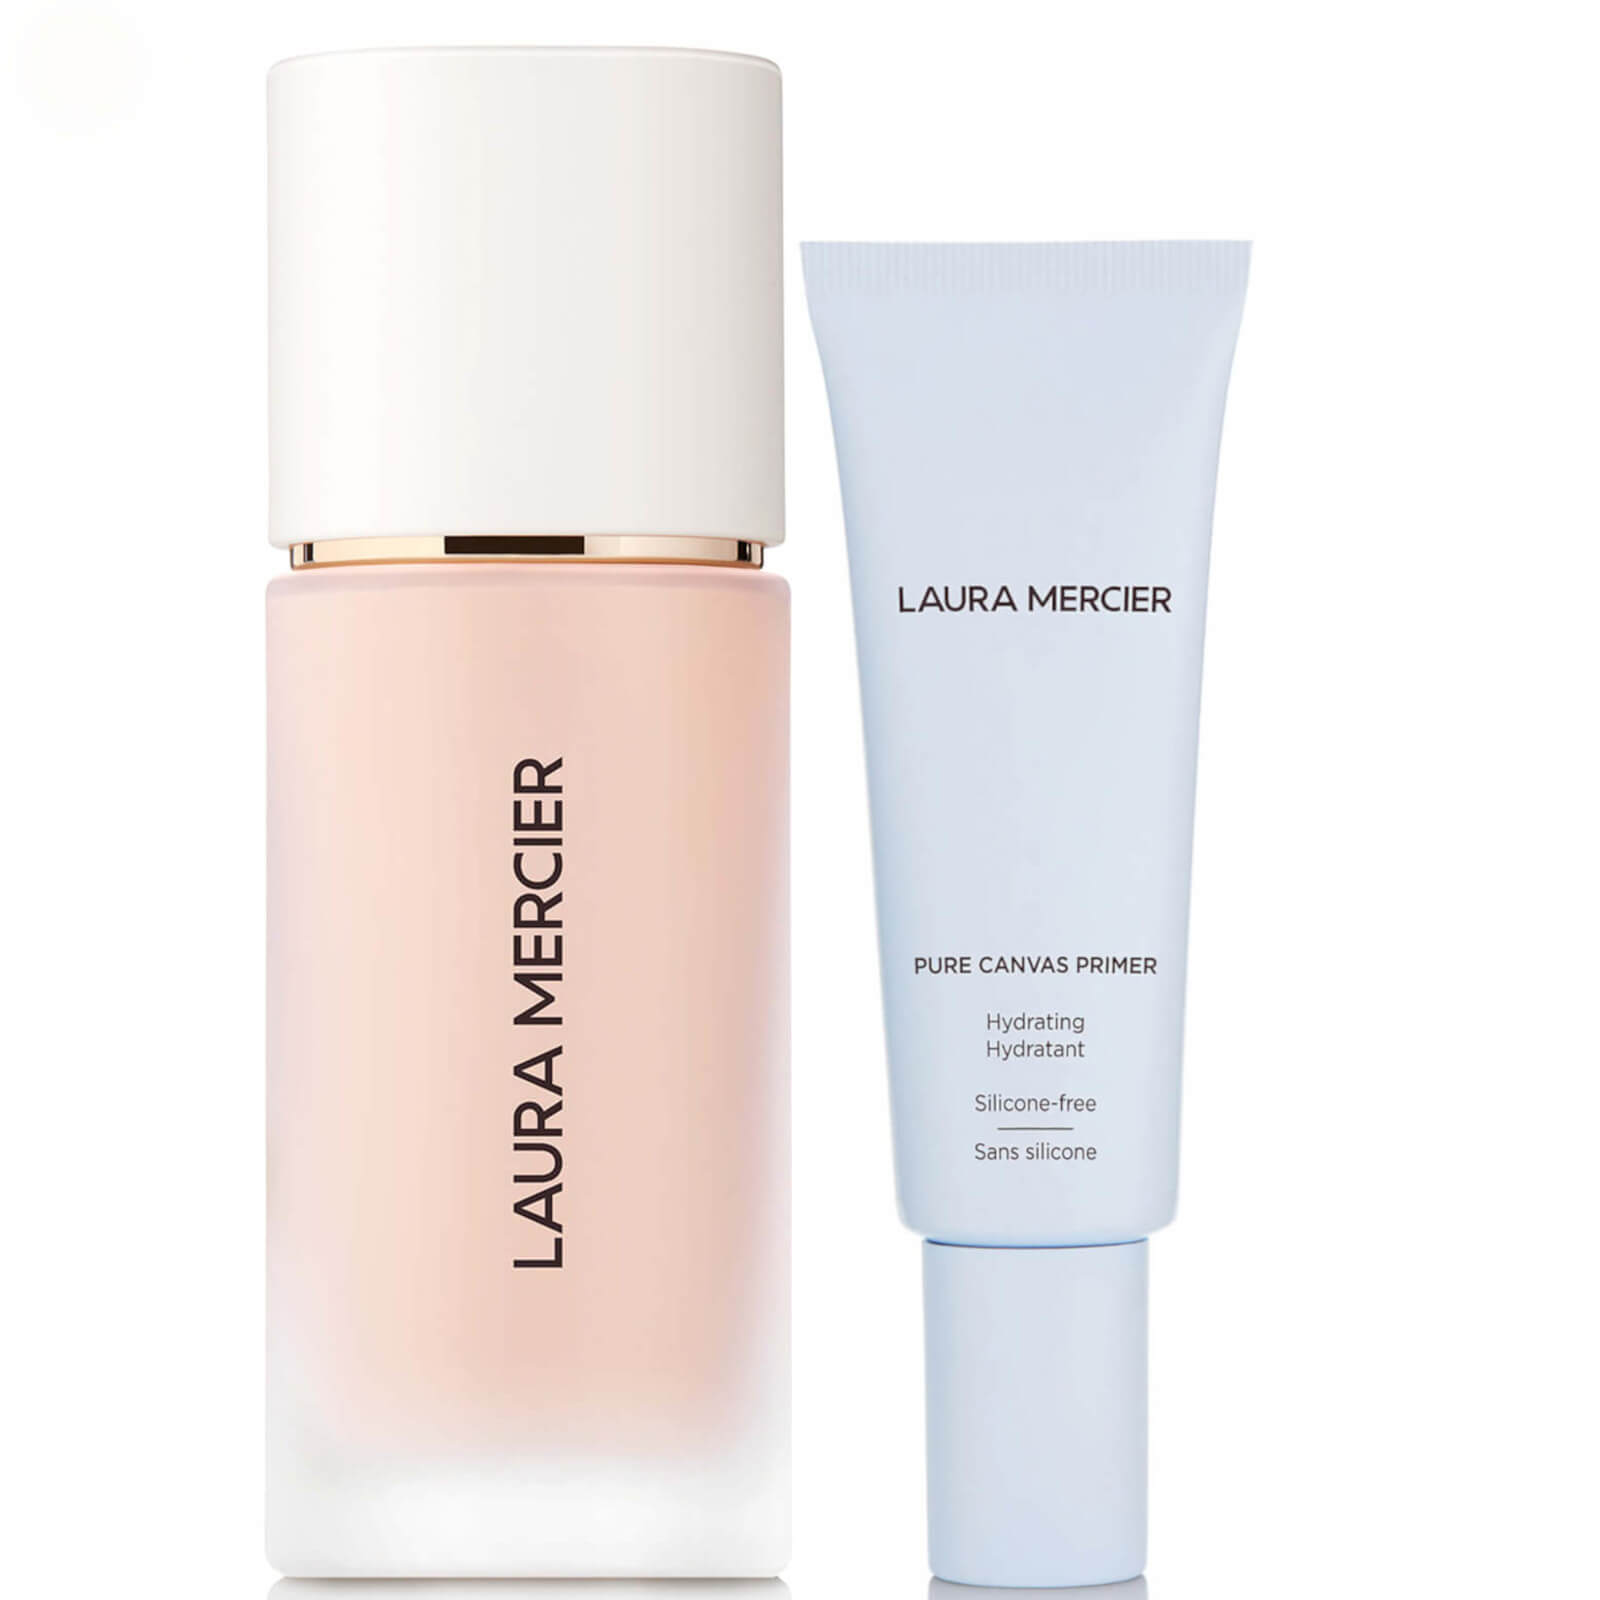 Laura Mercier Real Flawless Foundation and Pure Canvas Hydrating Primer Bundle (Various Shades) - Opal